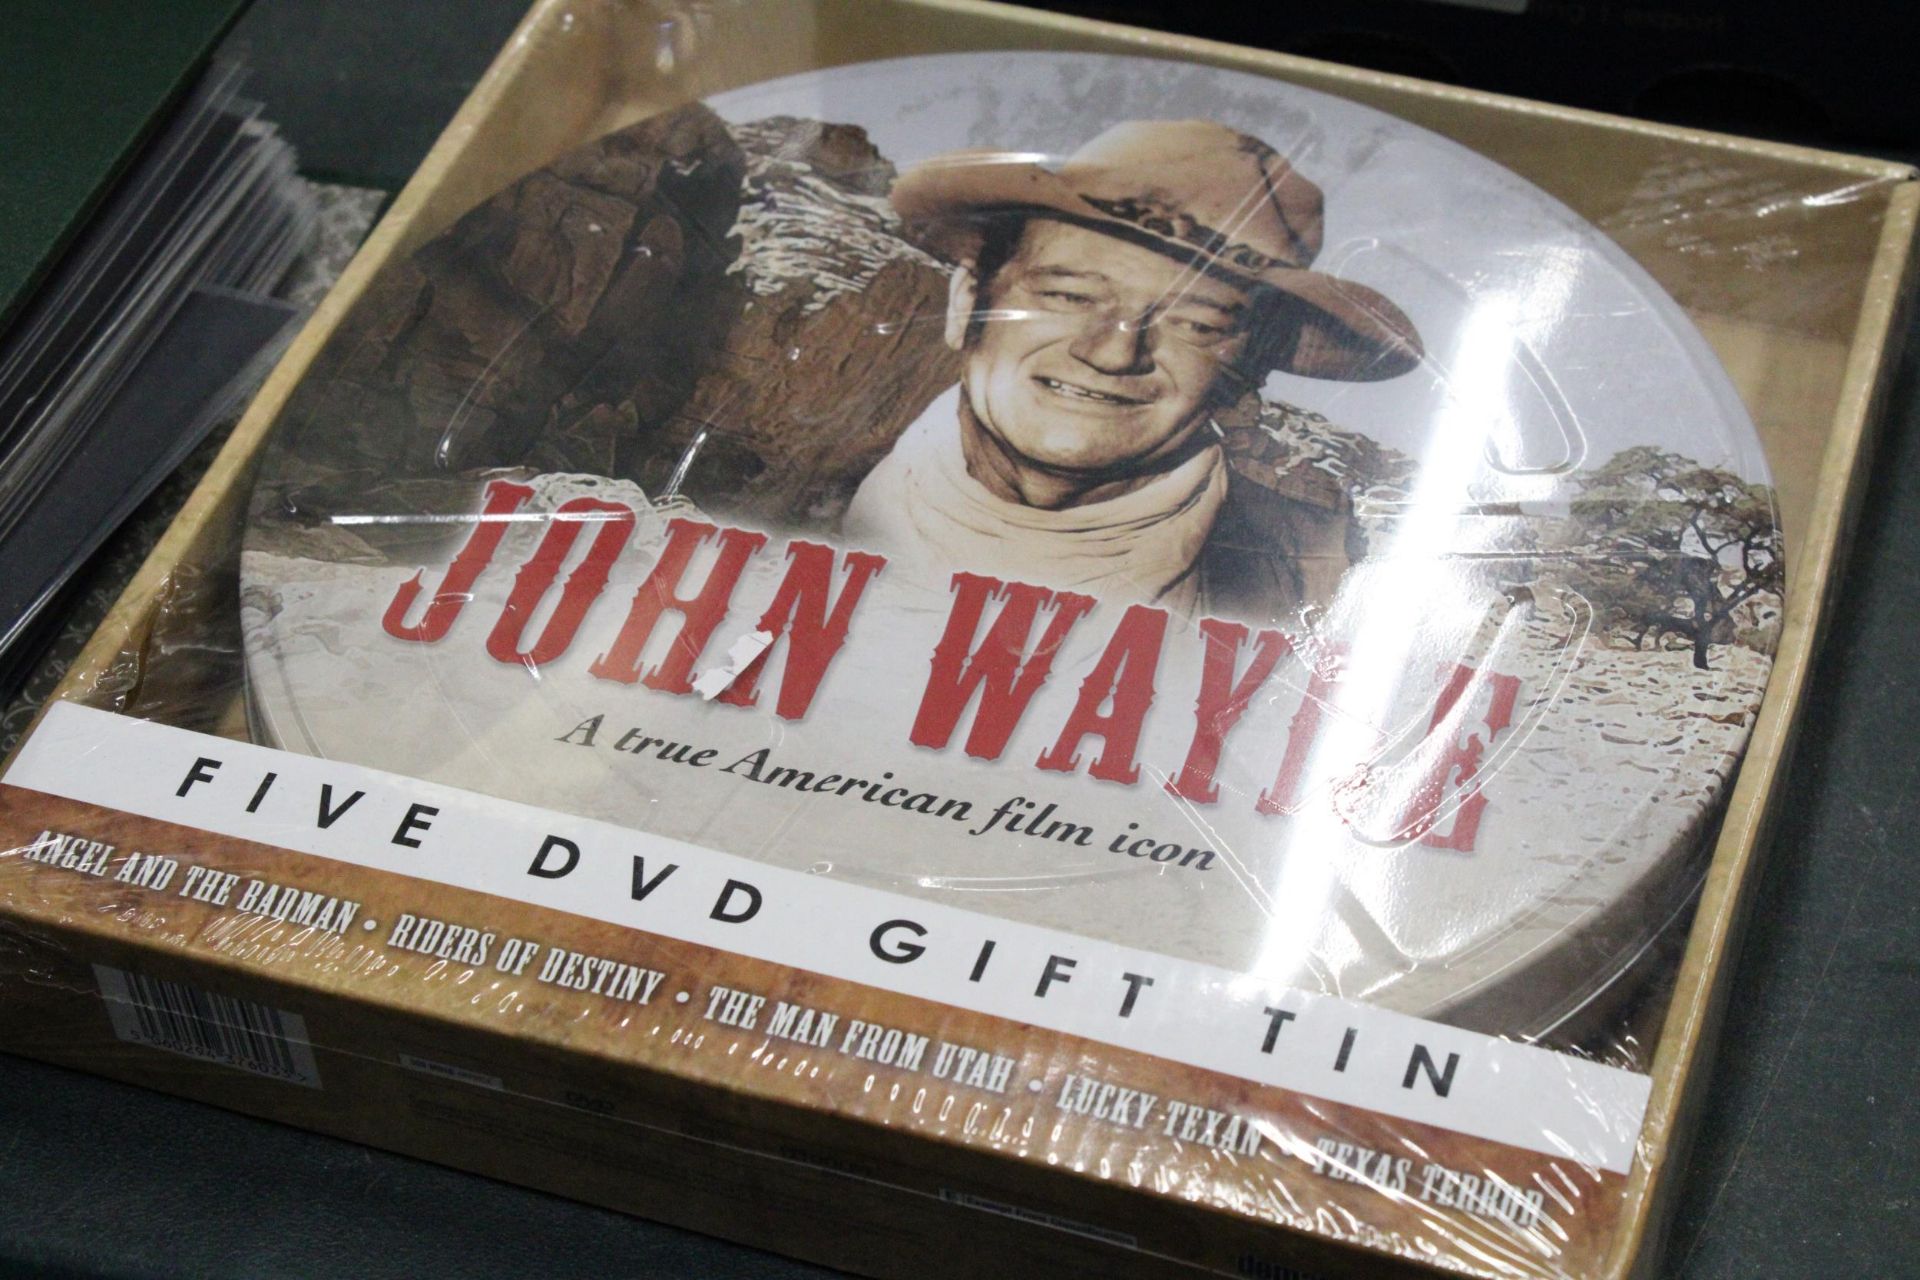 A NEW AND SEALED SET OF FIVE JOHN WAYNE DVD'S IN A METAL GIFT TIN - Image 2 of 4